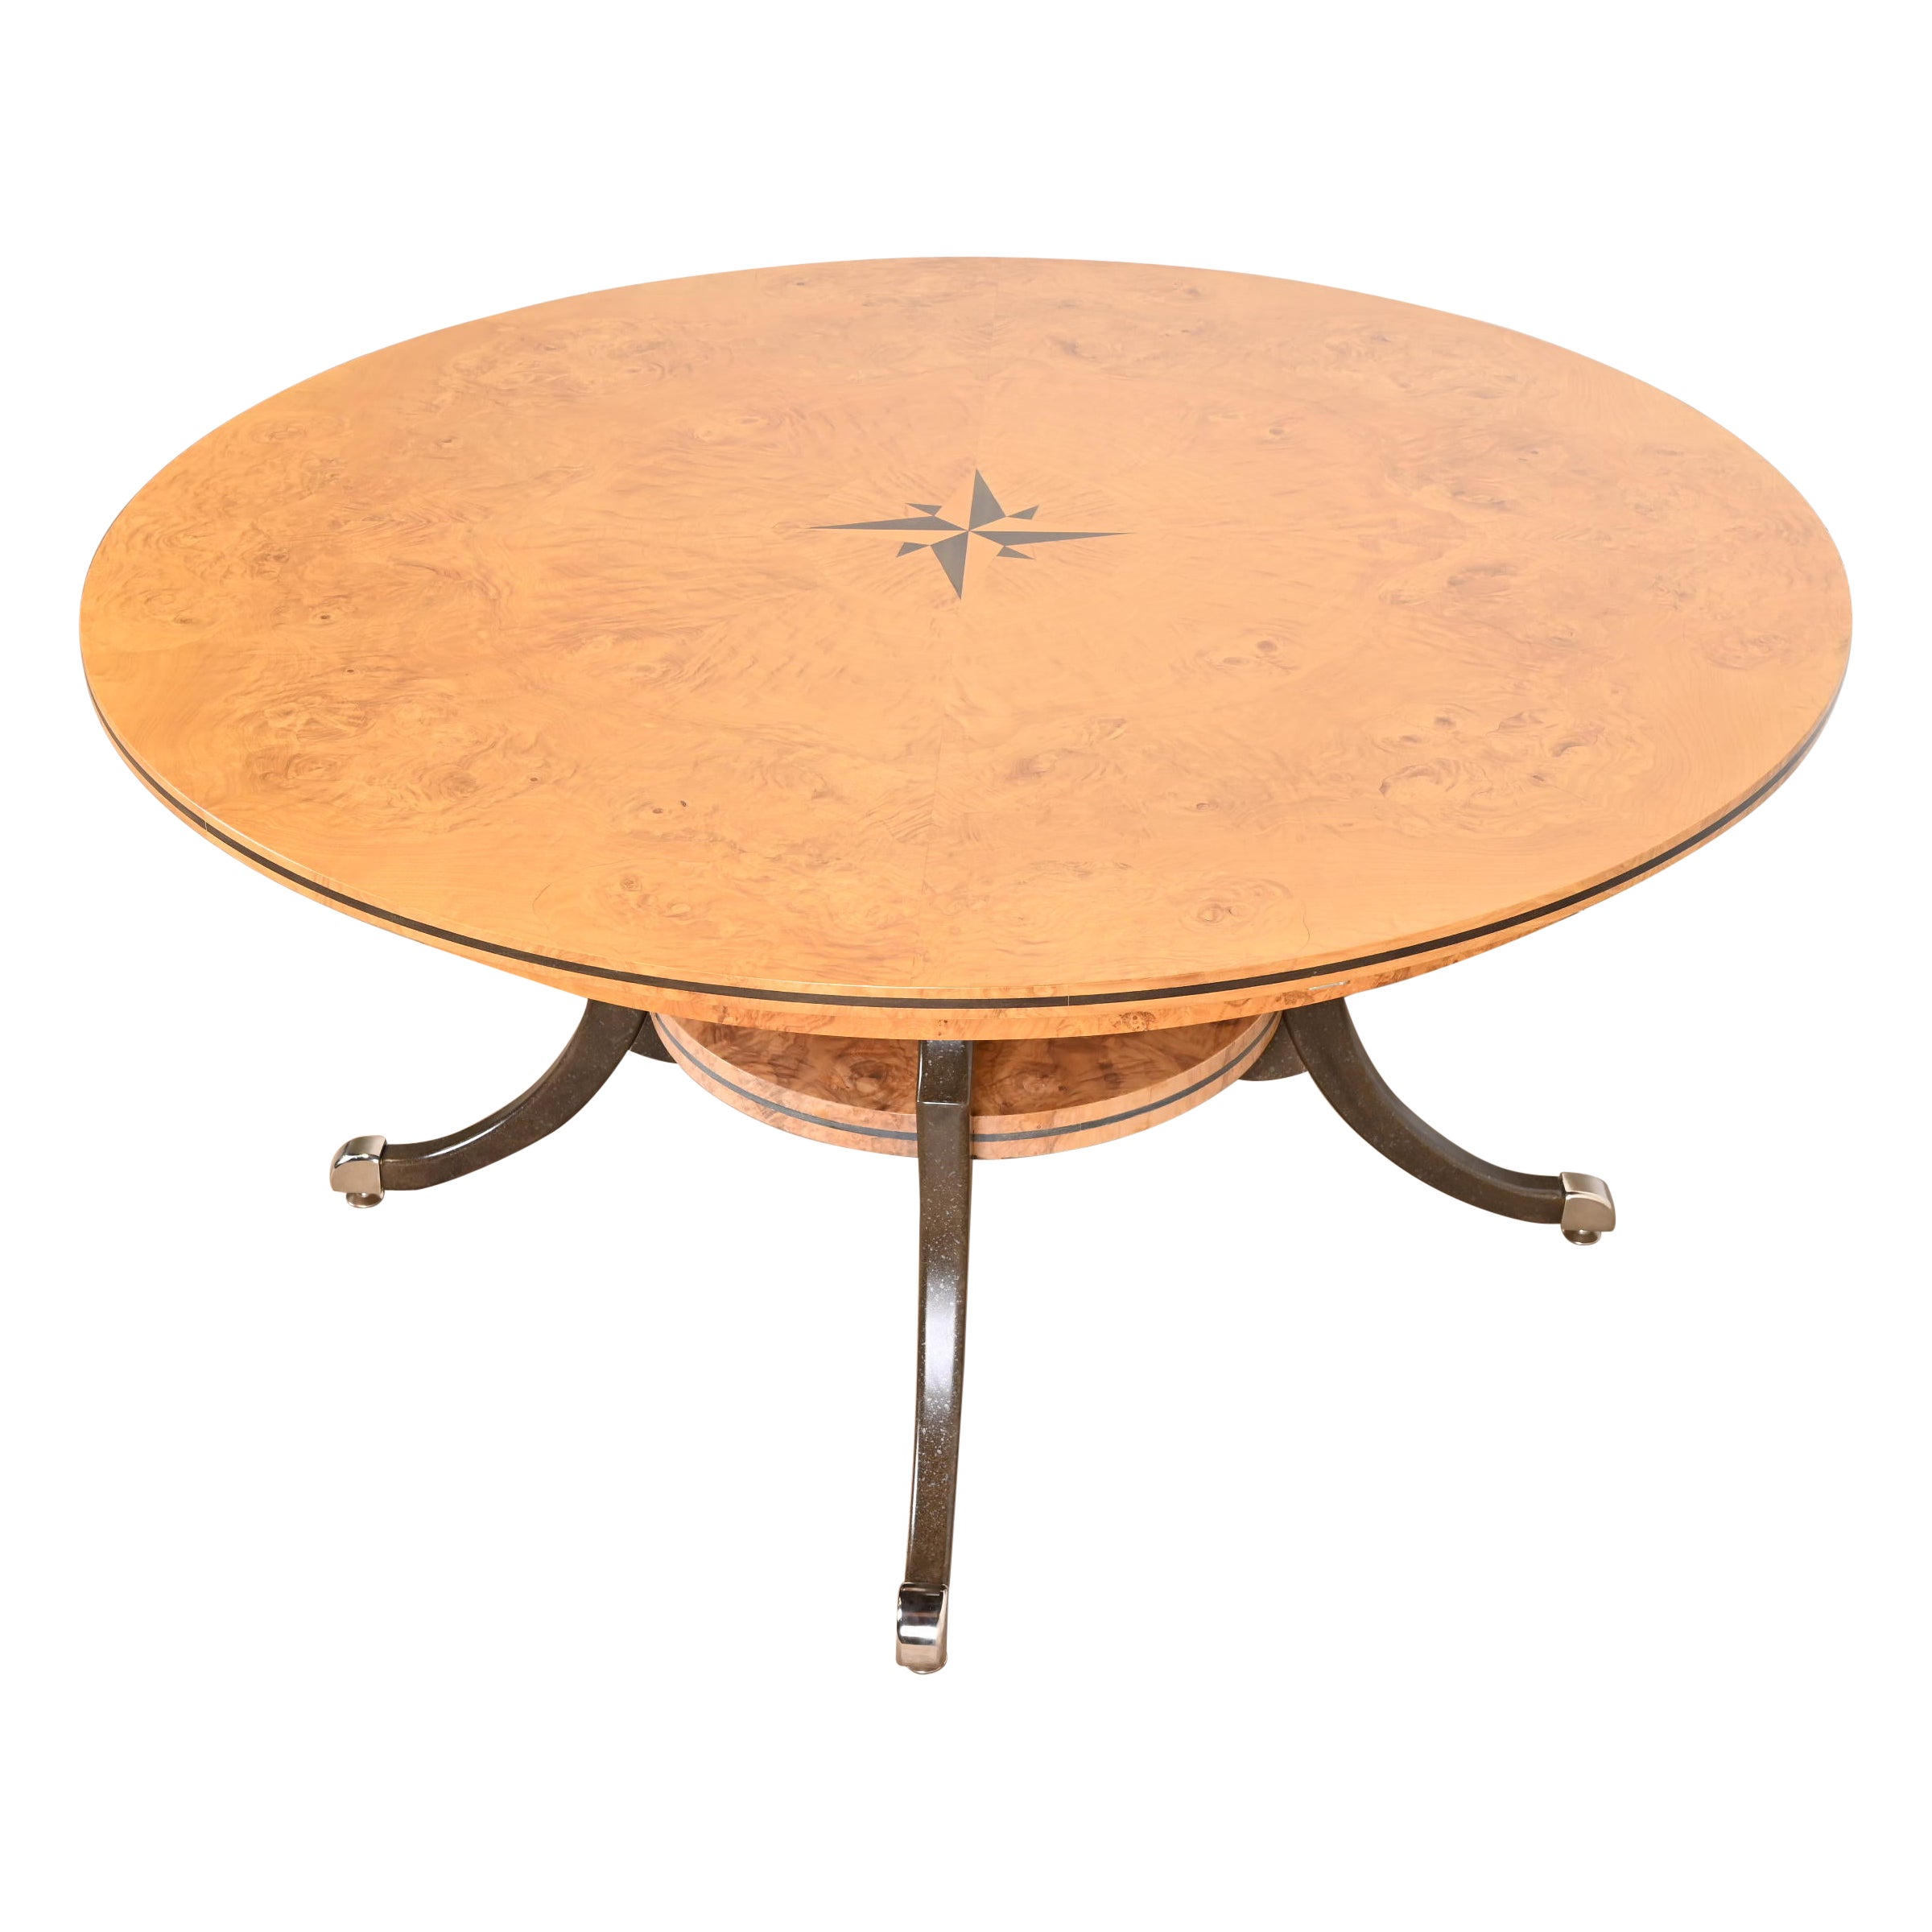 Regency Burl Wood Inlaid Round Pedestal Extension Dining Table, Newly Refinished For Sale